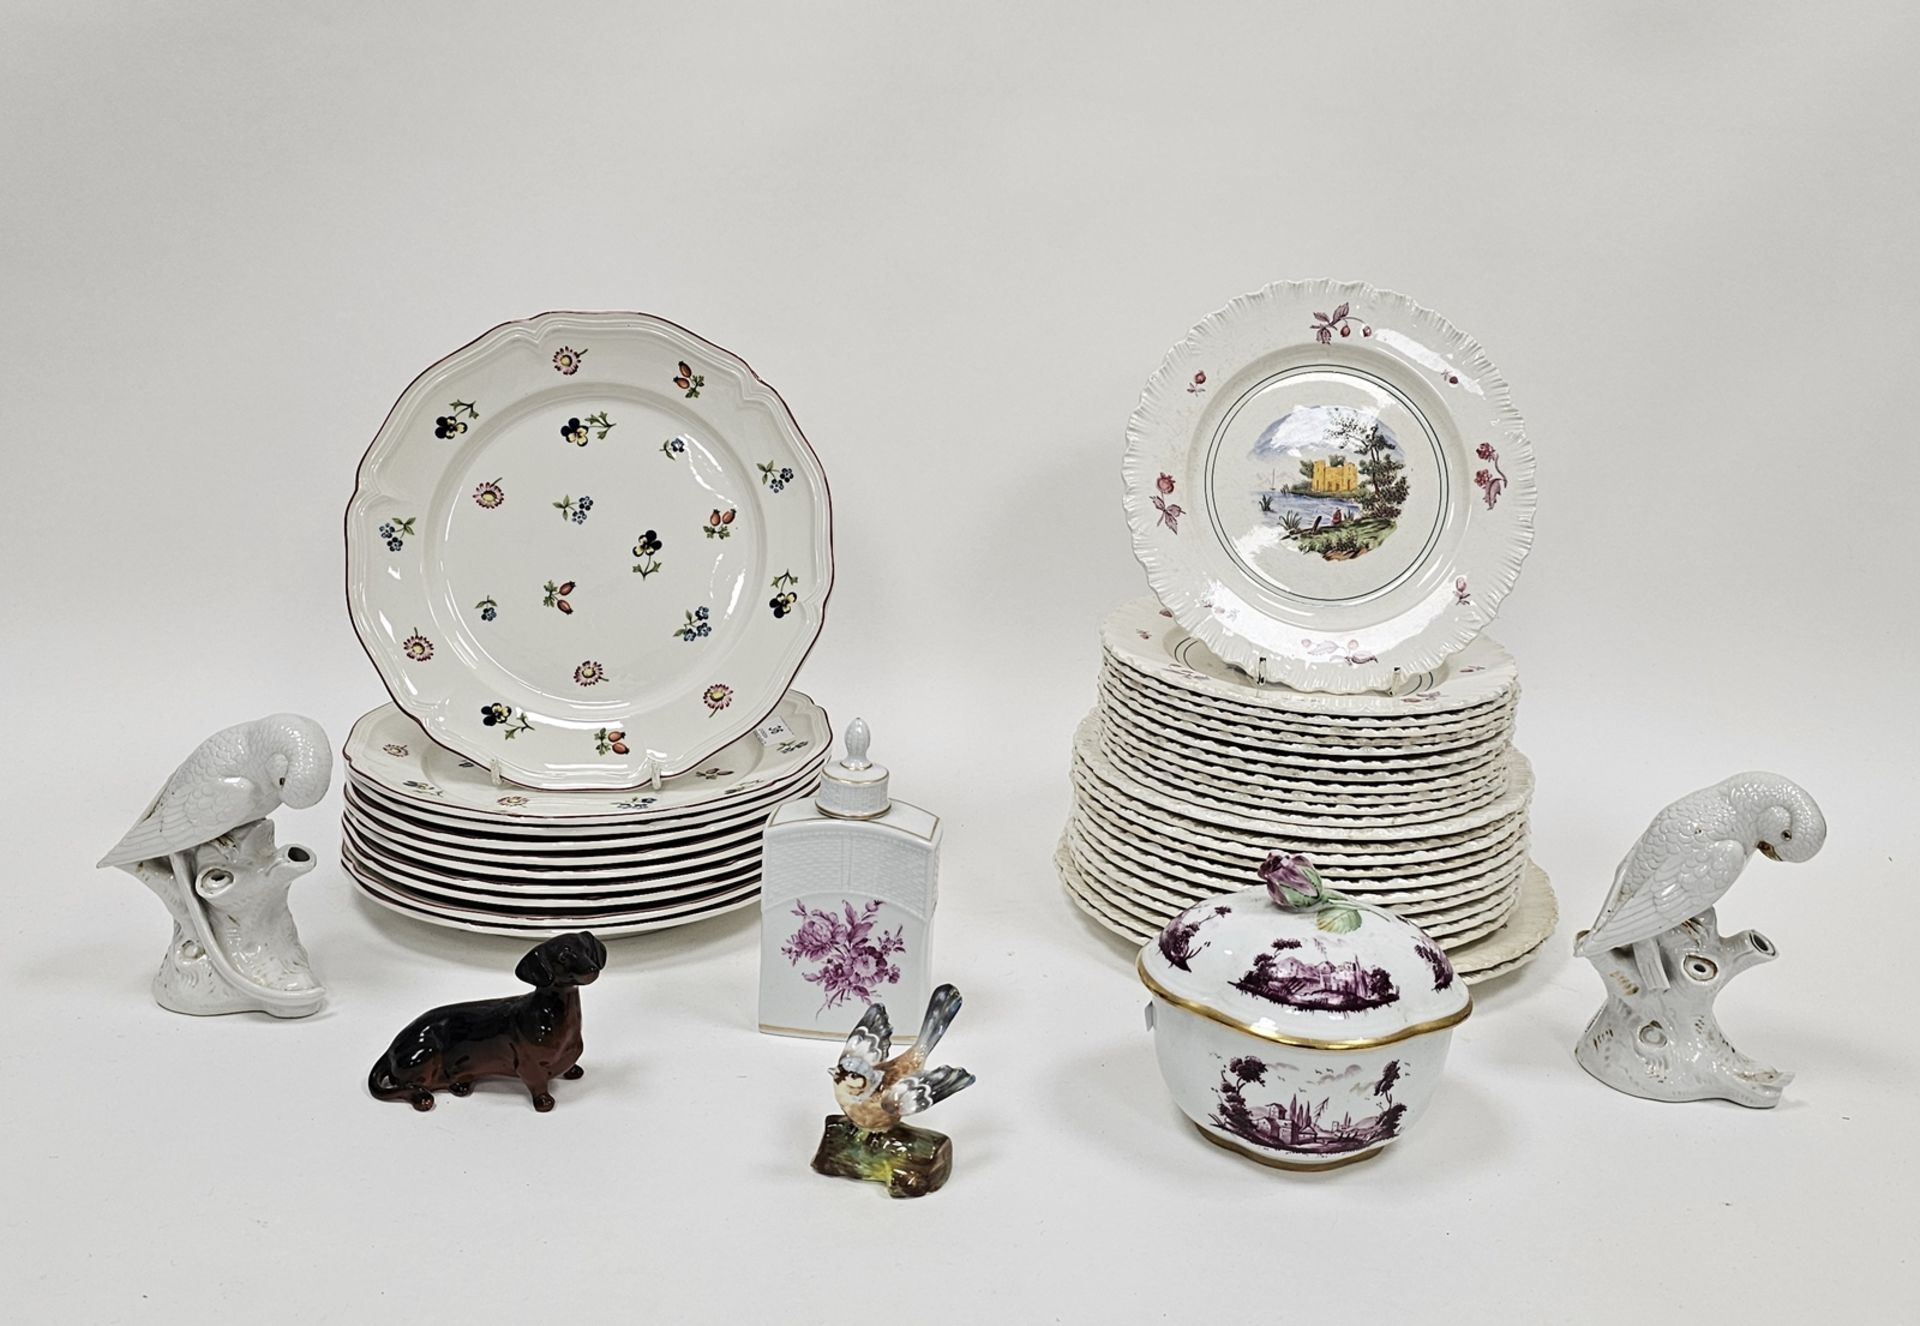 Villeroy & Boch Petite Fleur pattern collection of 10 dinner plates, printed factory marks, a